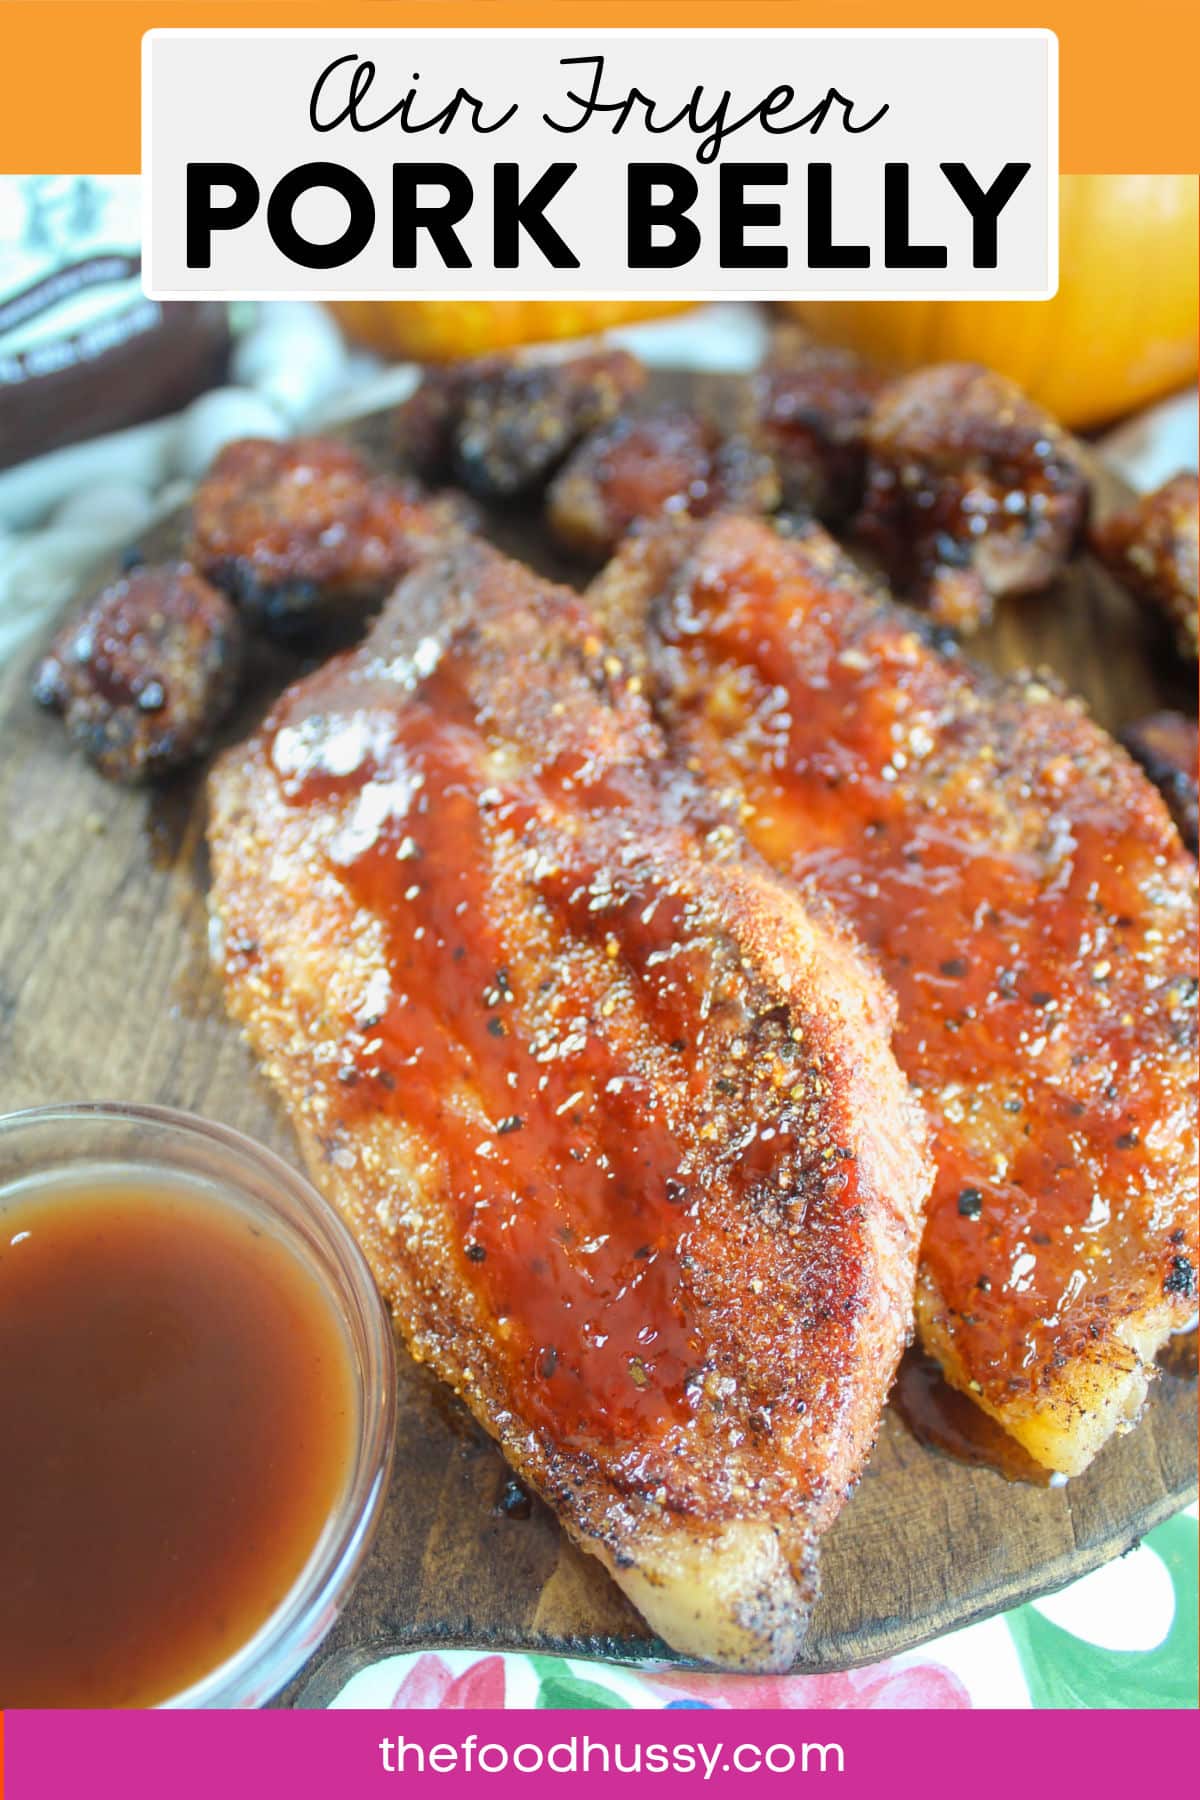 Air Fryer Pork Belly is a delightfully indulgent treat! Whether you make bites or slices - this pork belly will melt in your mouth and give you a whole new appreciation for pork belly!  via @foodhussy